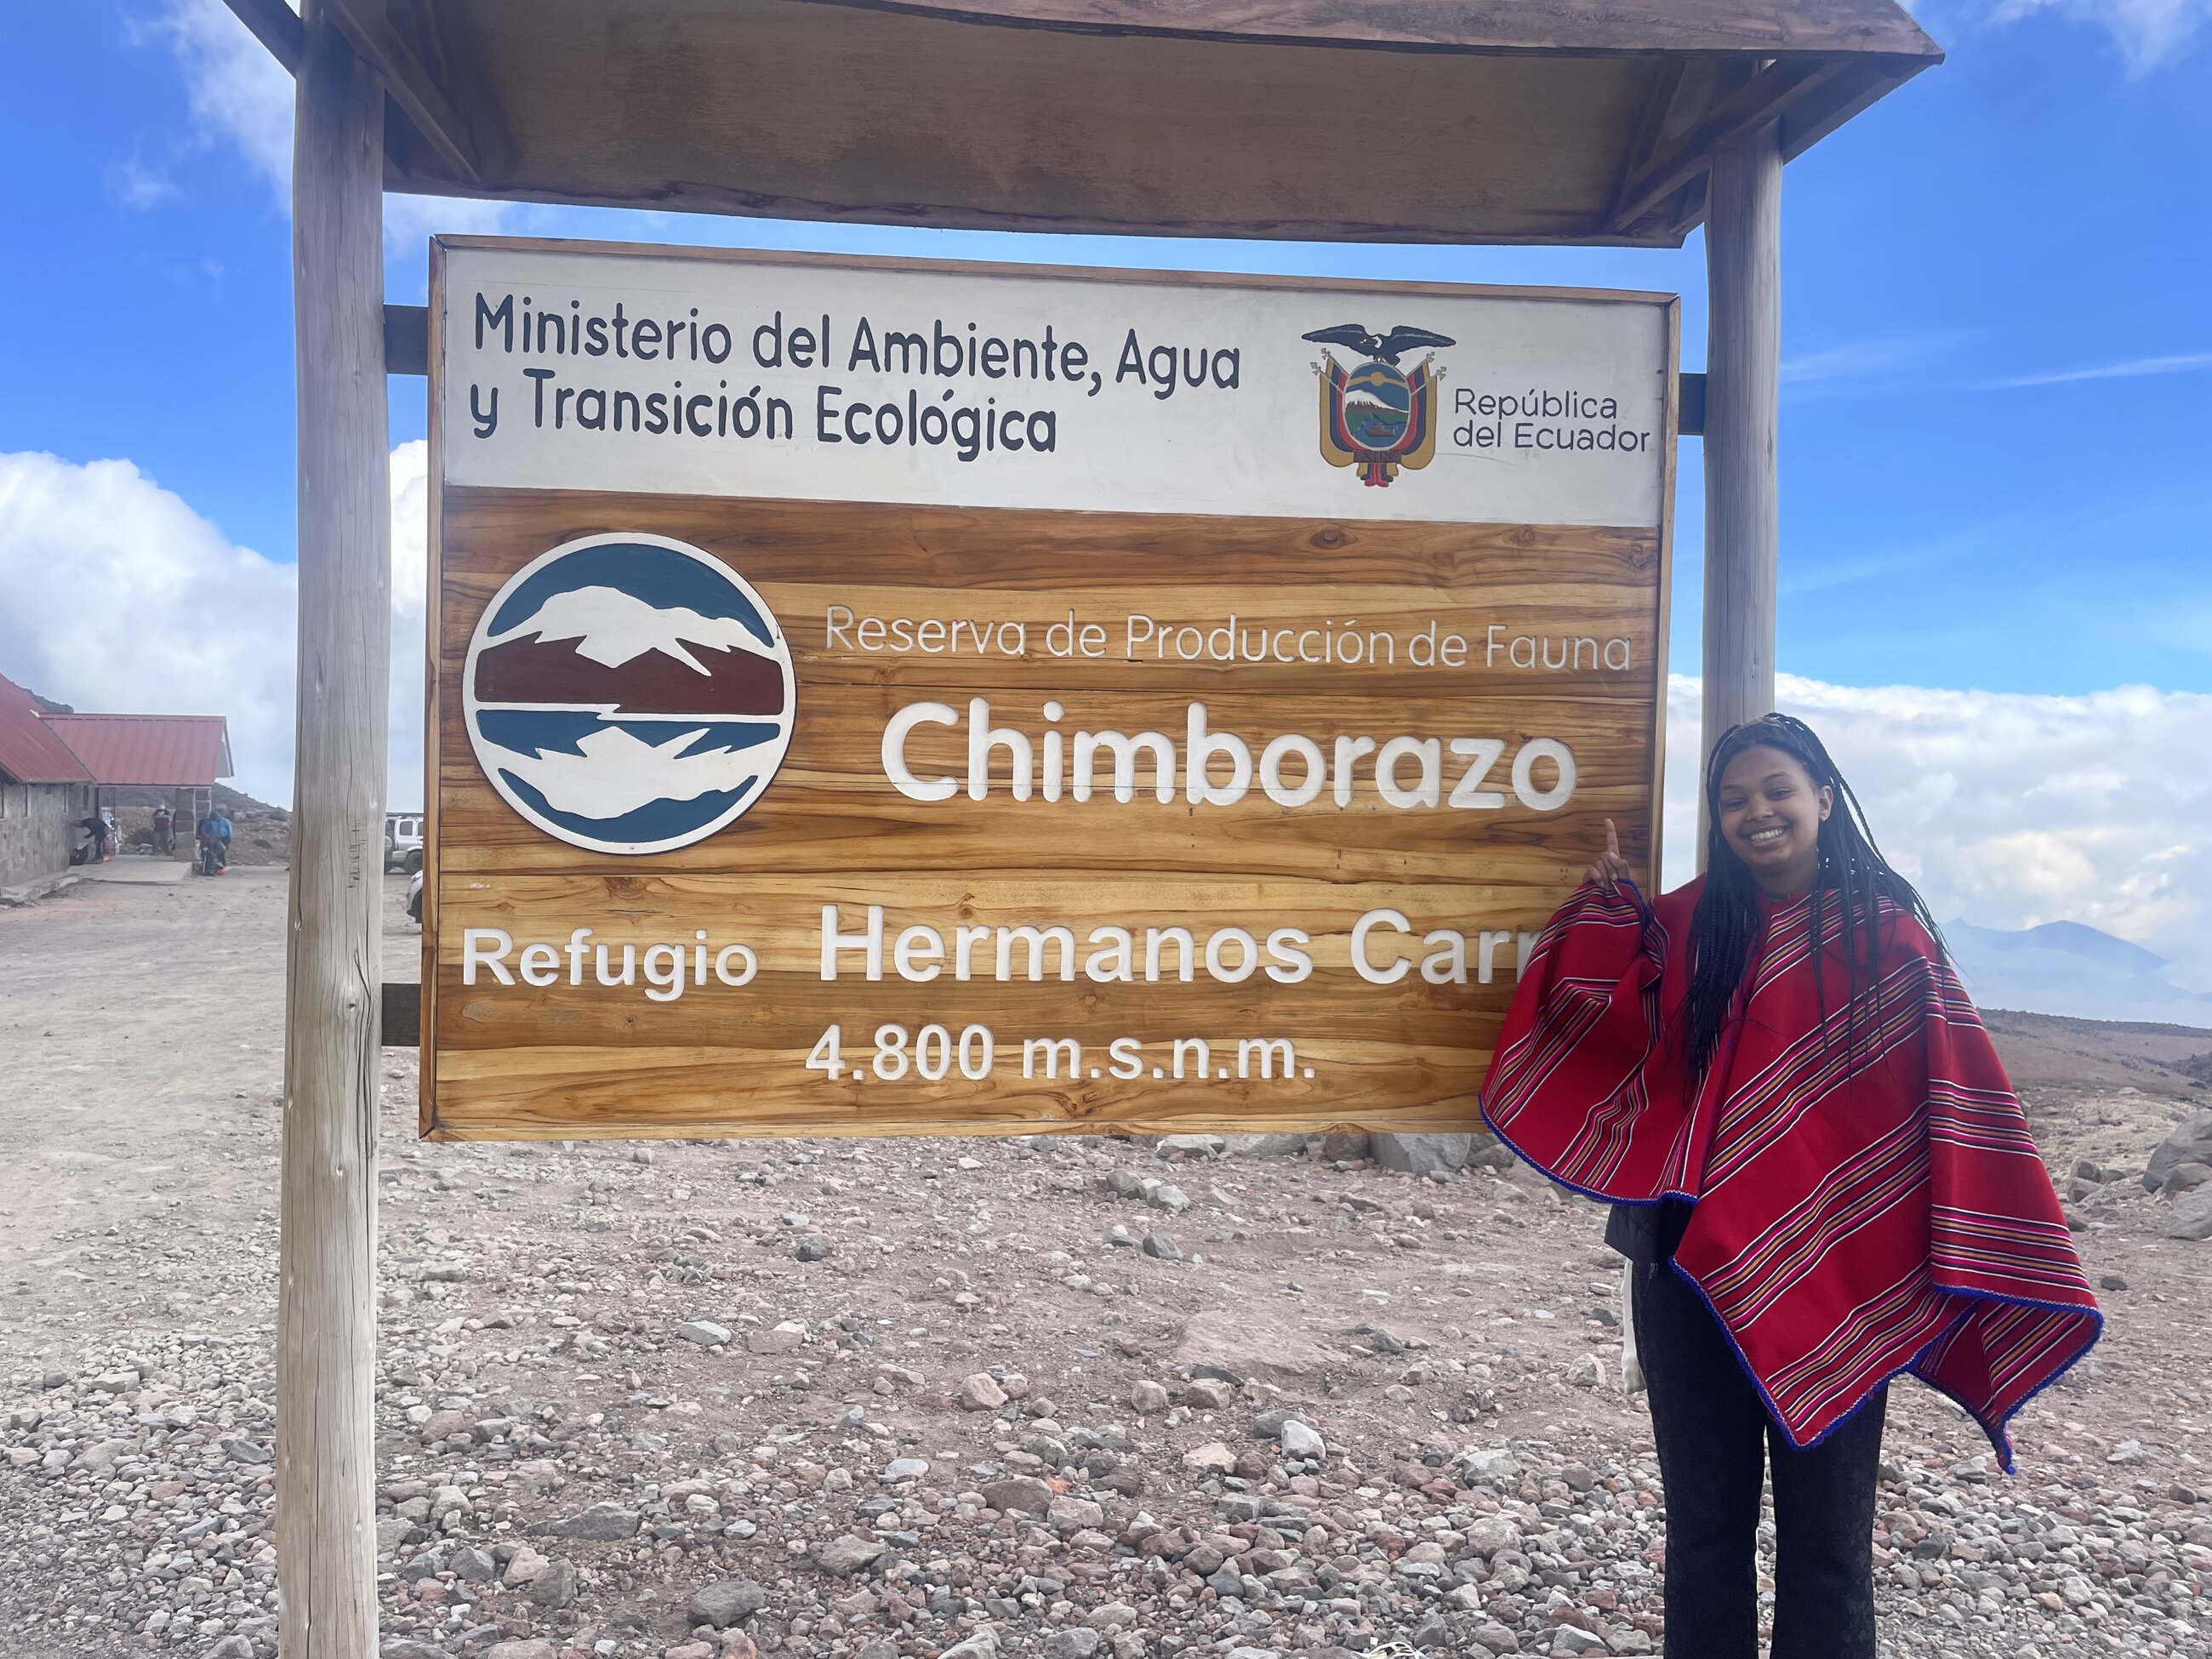 Chimborazo is the tallest mountain above sea level that is closes to the sun.